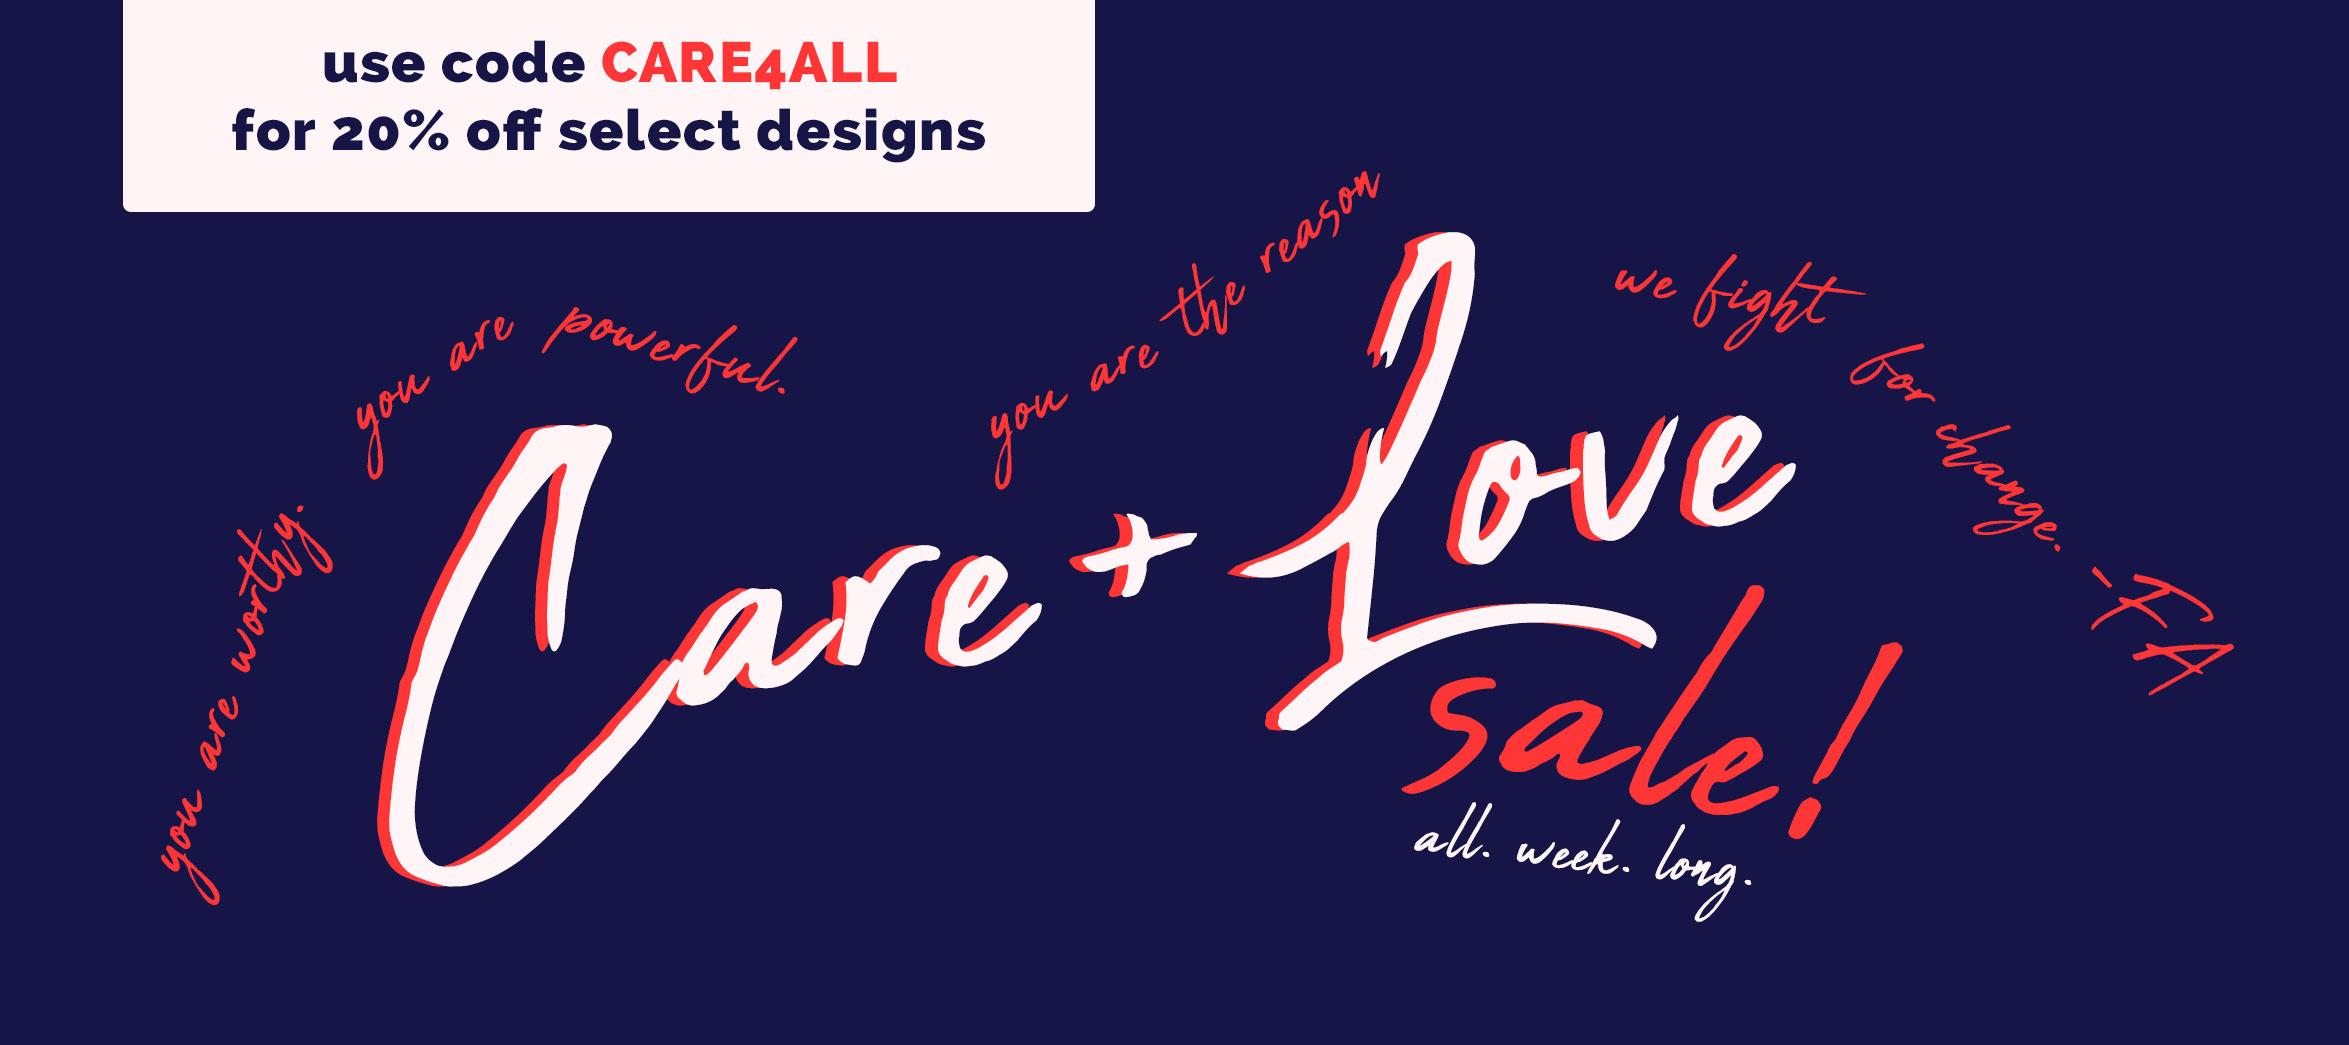 Care + Love Sale! All week long. Use code CARE4ALL for 20% off select designs